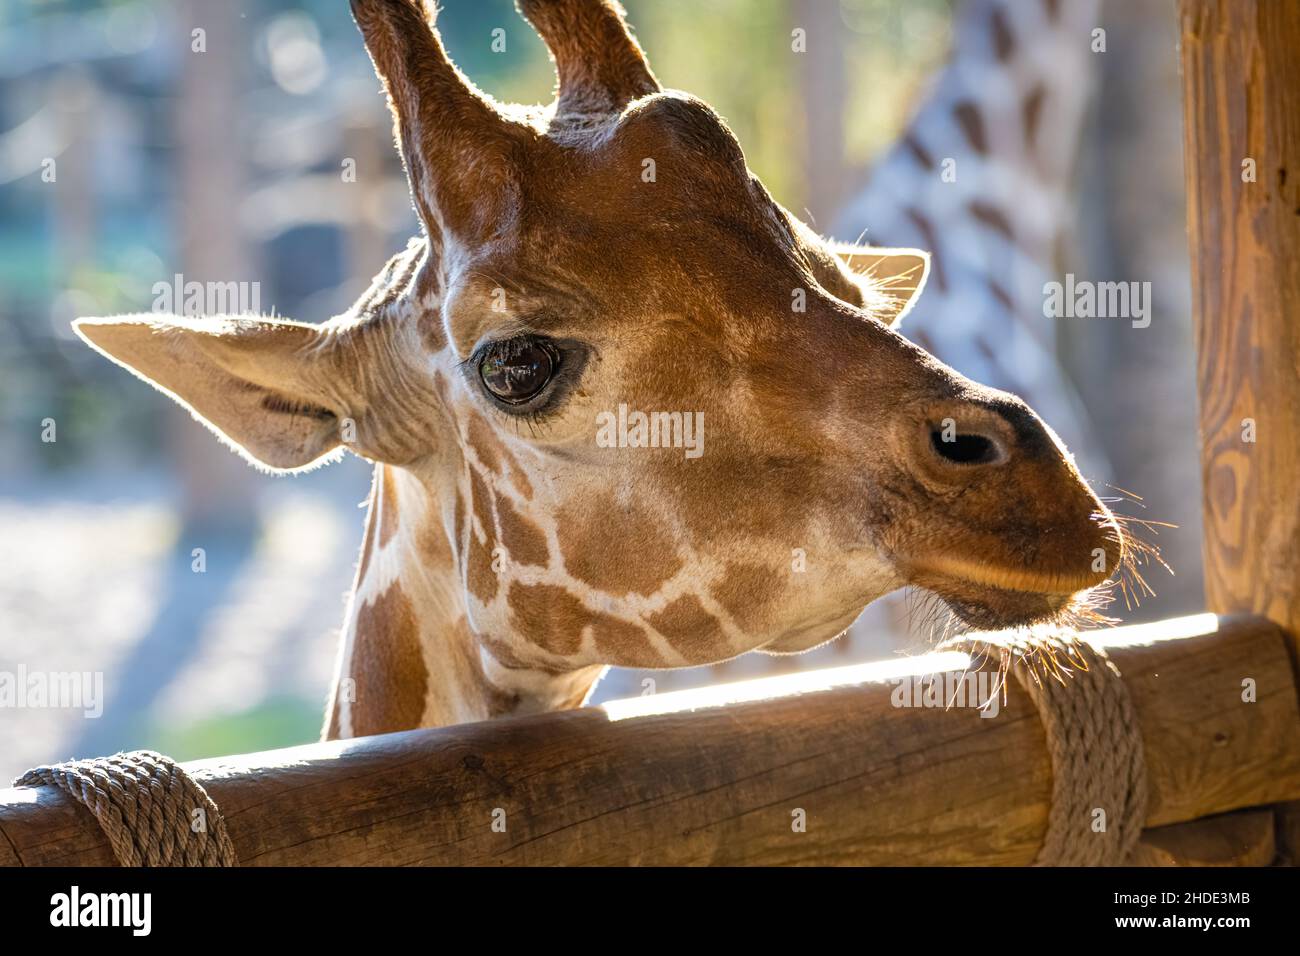 Reticulated giraffe (Giraffa camelopardalis reticulata) in the Africa Loop at Jacksonville Zoo and Gardens in Jacksonville, Florida. (USA) Stock Photo